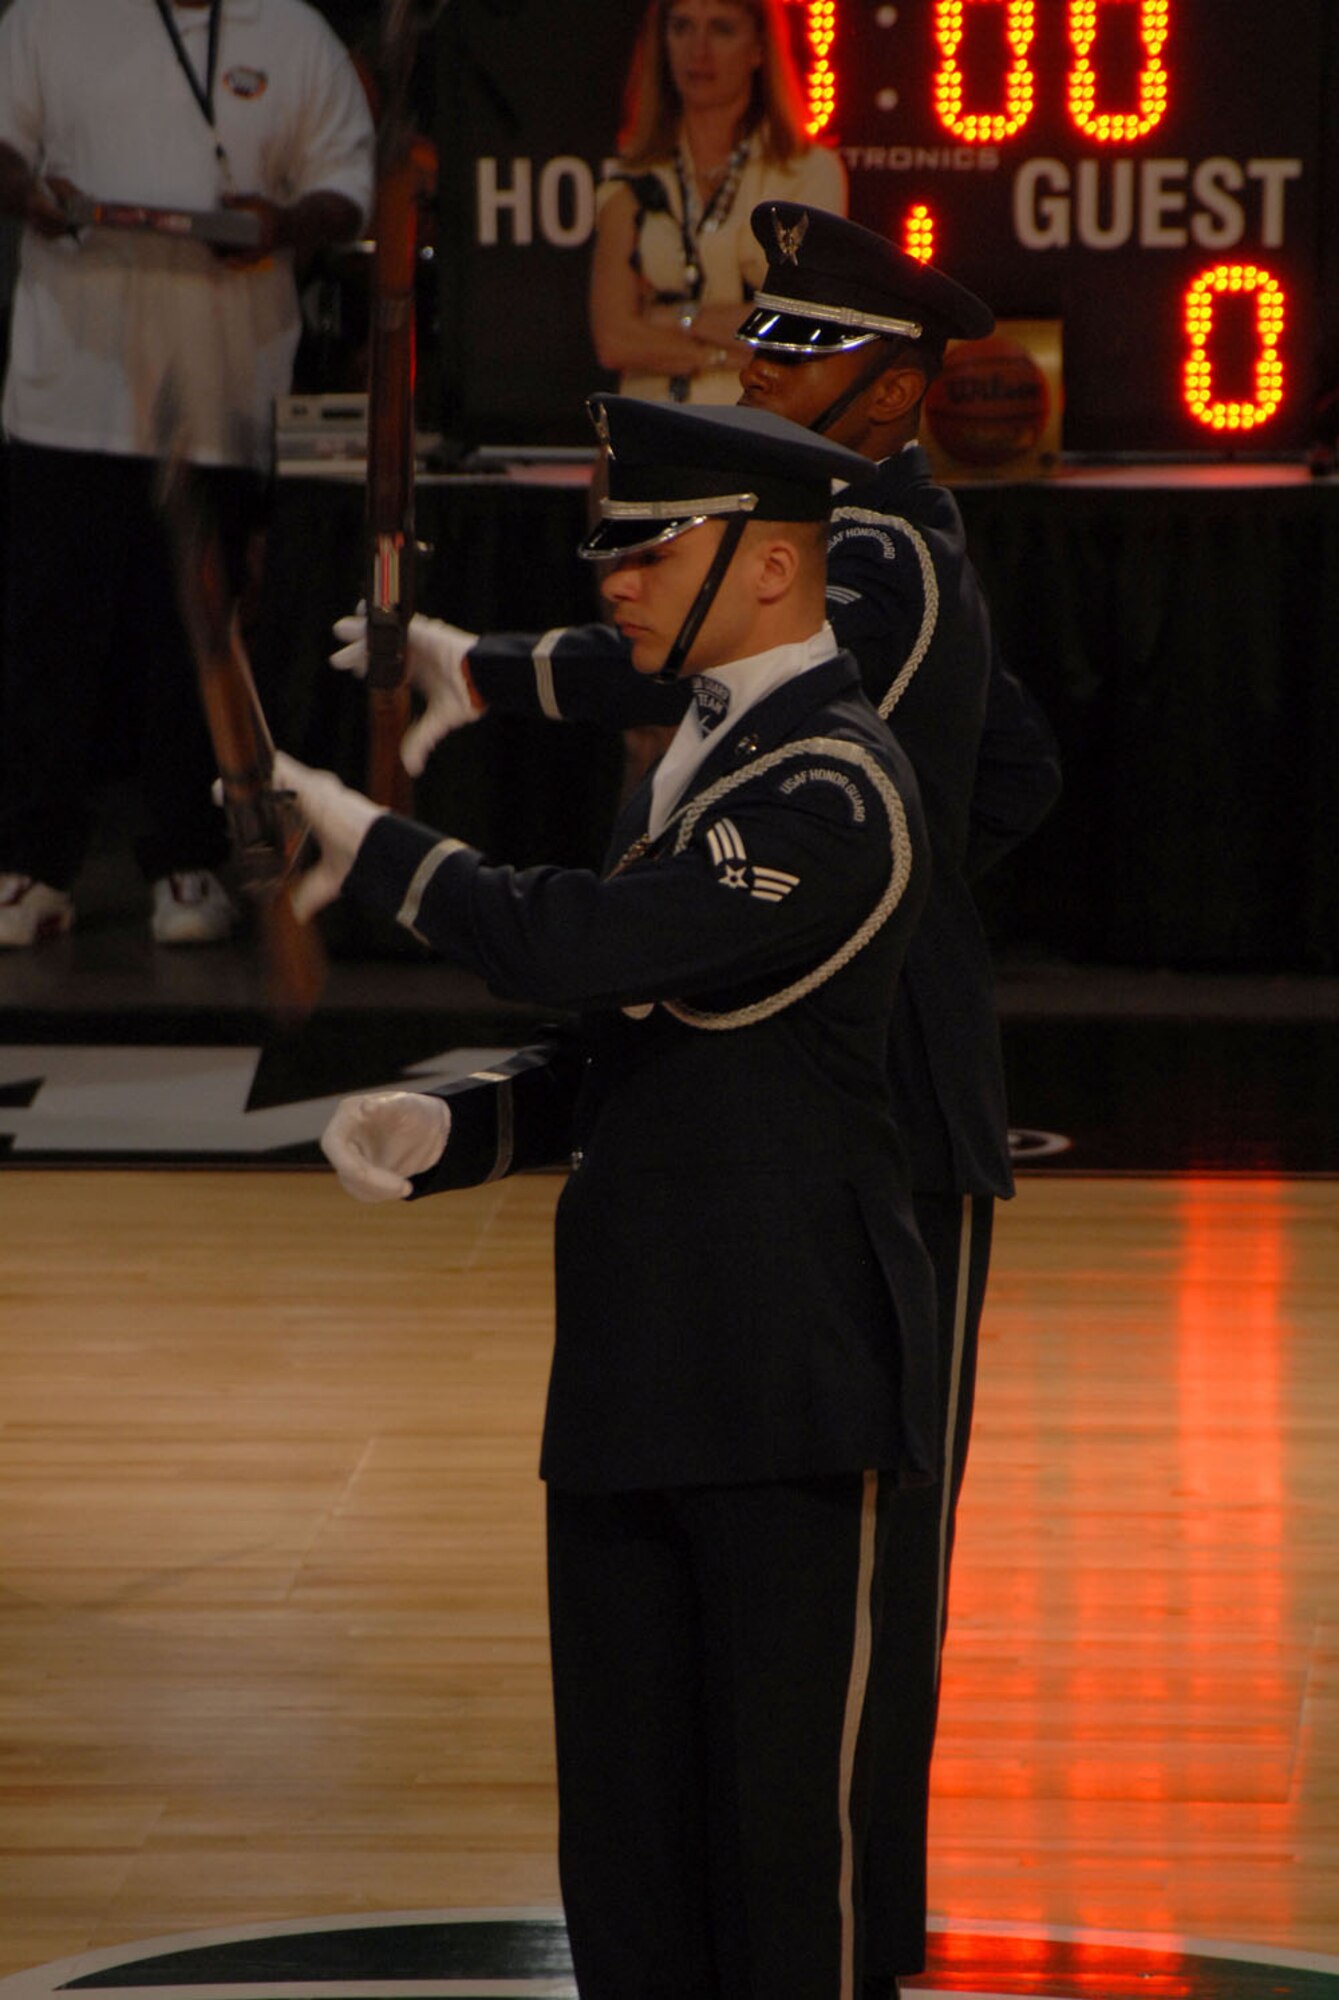 ATLANTA, Ga. -- Members of the Air Force Honor Guard Drill Team perform at Hoop City during events surrounding the NCAA Final Four Games March 31 - April 2.  The Air Force Honor Guard Drill Team was invited to perform for various ceremonies associated with the NCAA Final Four events, including the opening ceremonies at Centennial Olympic Park March 31.